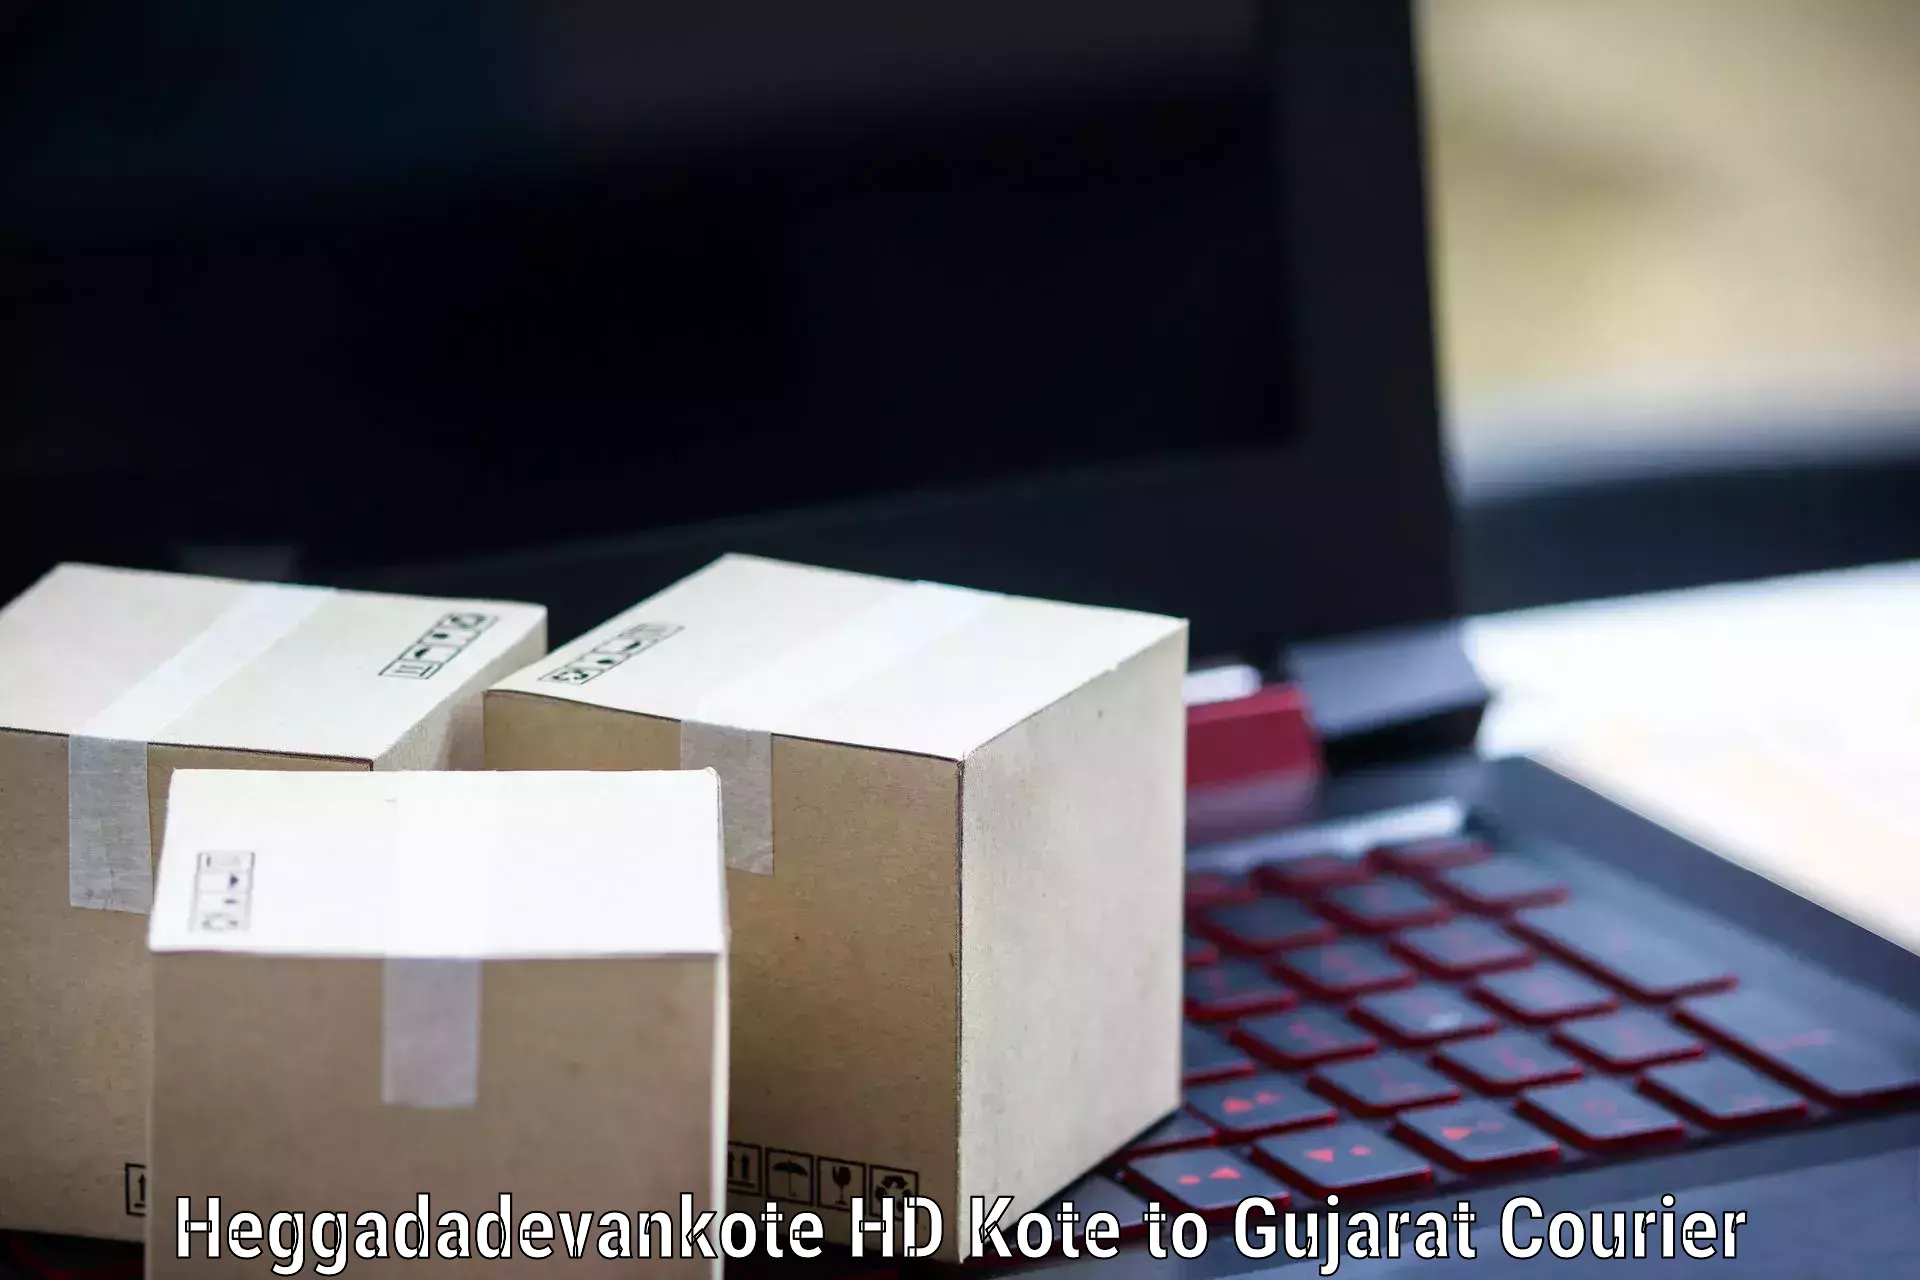 Optimized shipping services in Heggadadevankote HD Kote to Dahod